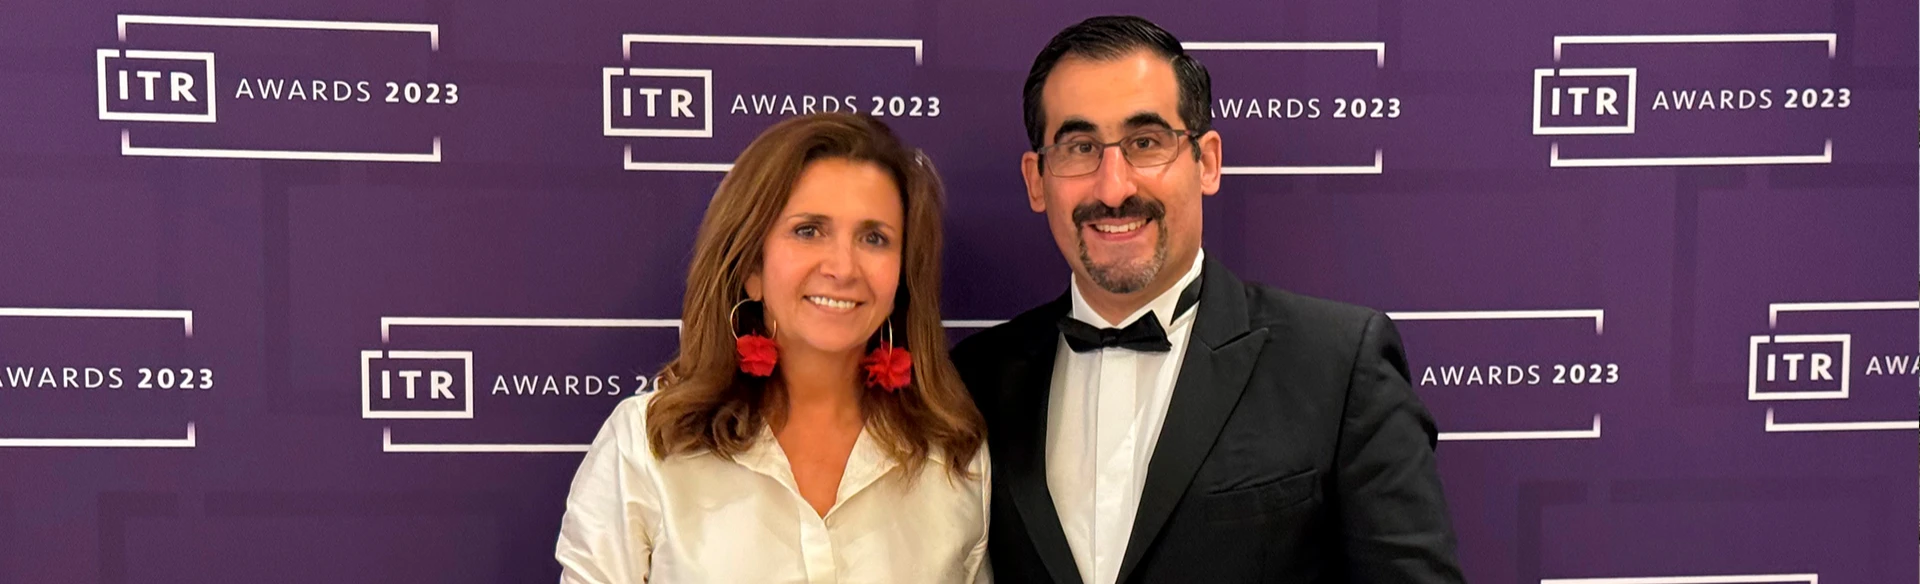 Pérez-Llorca, Tax Firm of the Year in Spain according to the International Tax Review